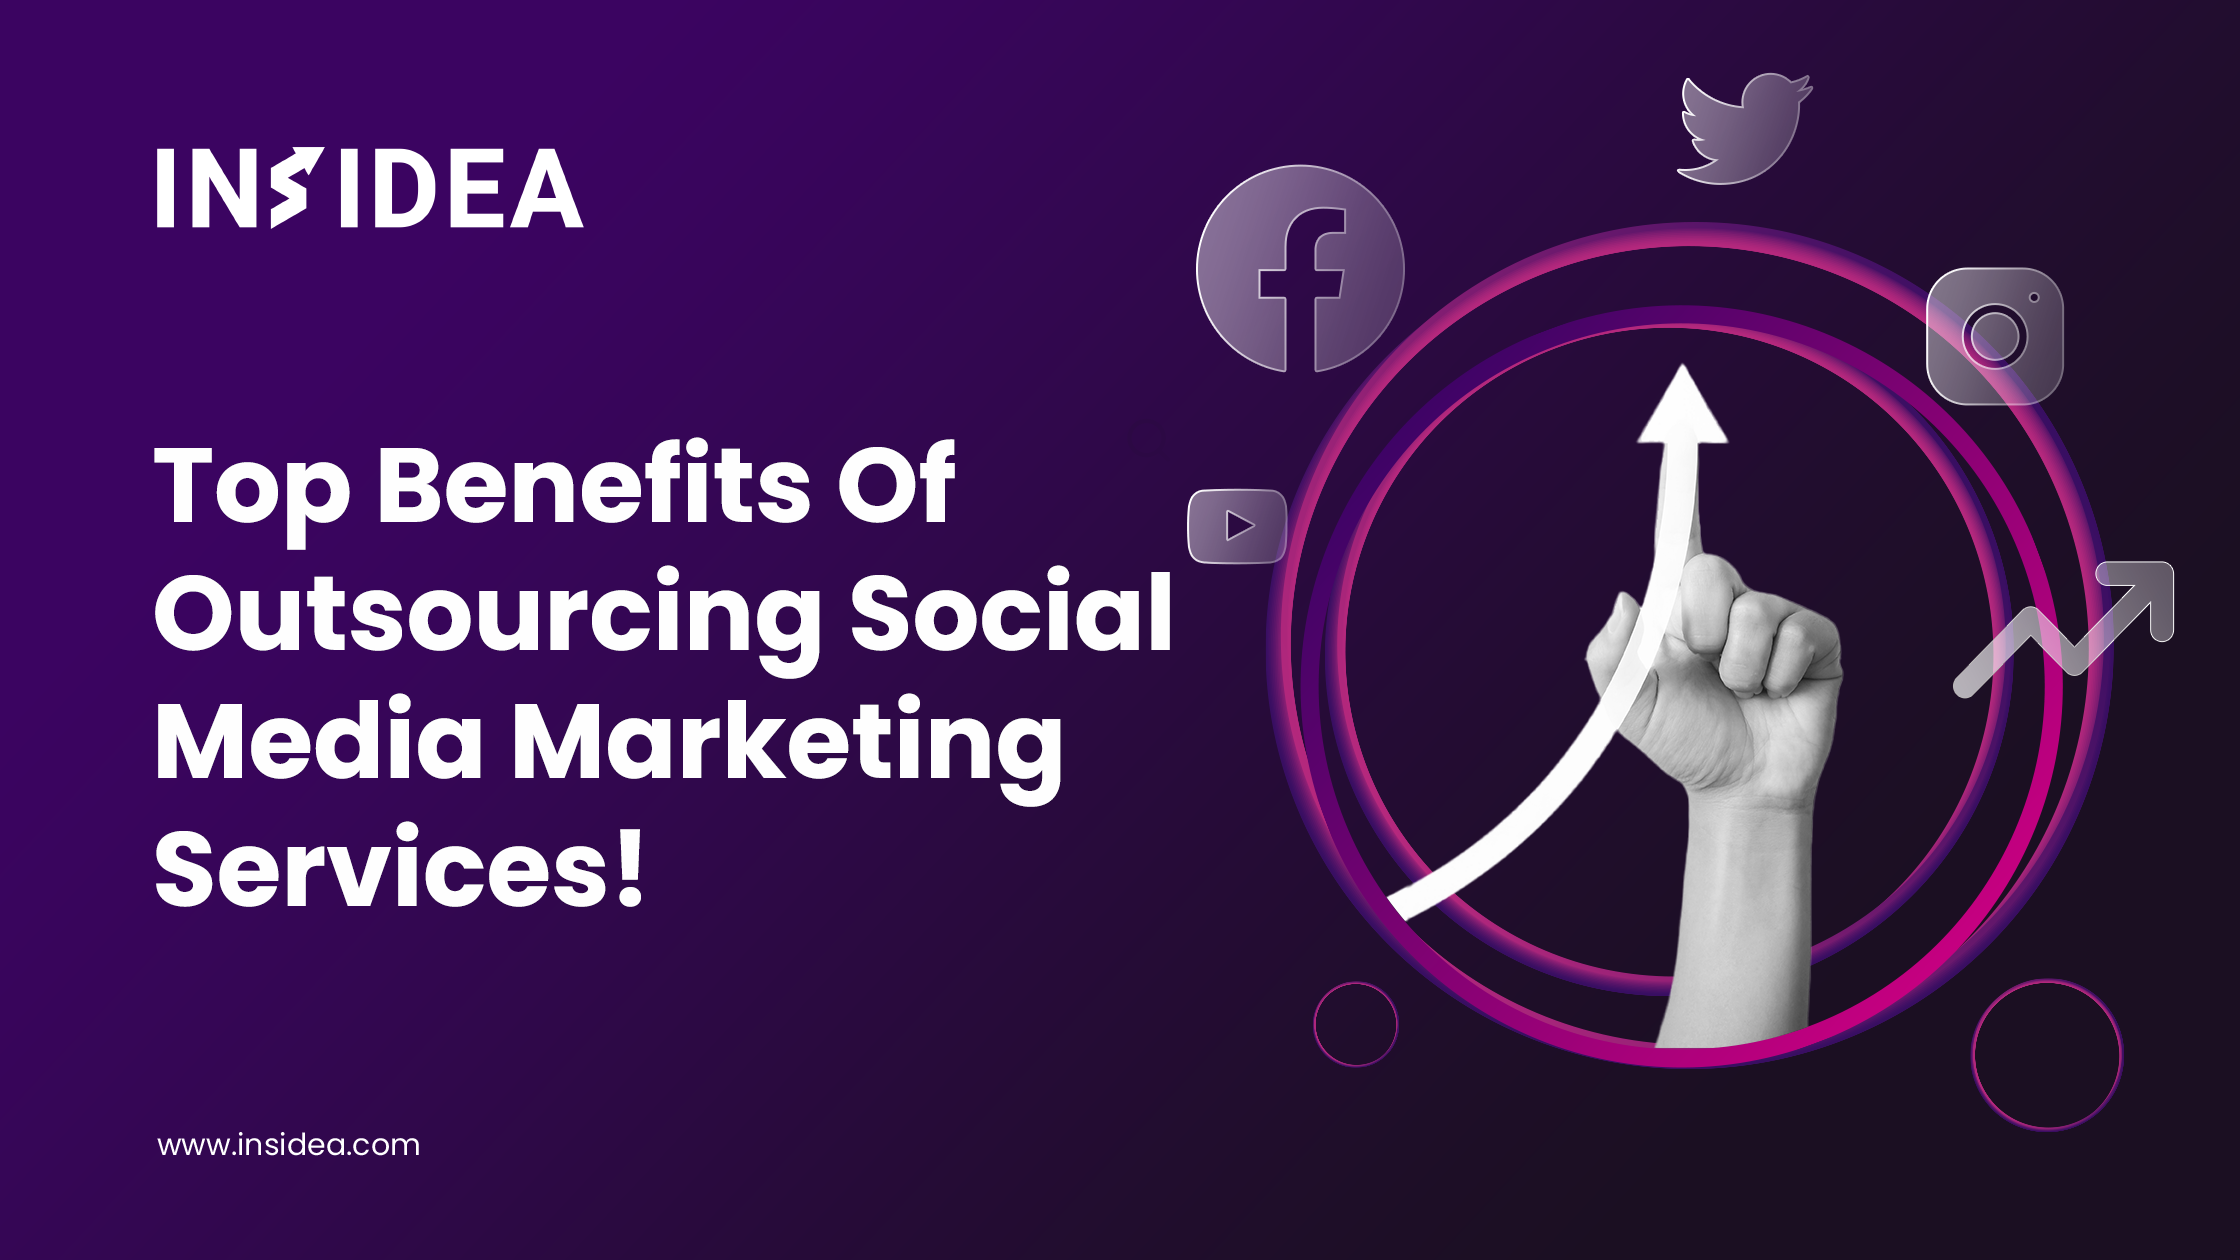 Top 5 benefits of outsourcing social media marketing services